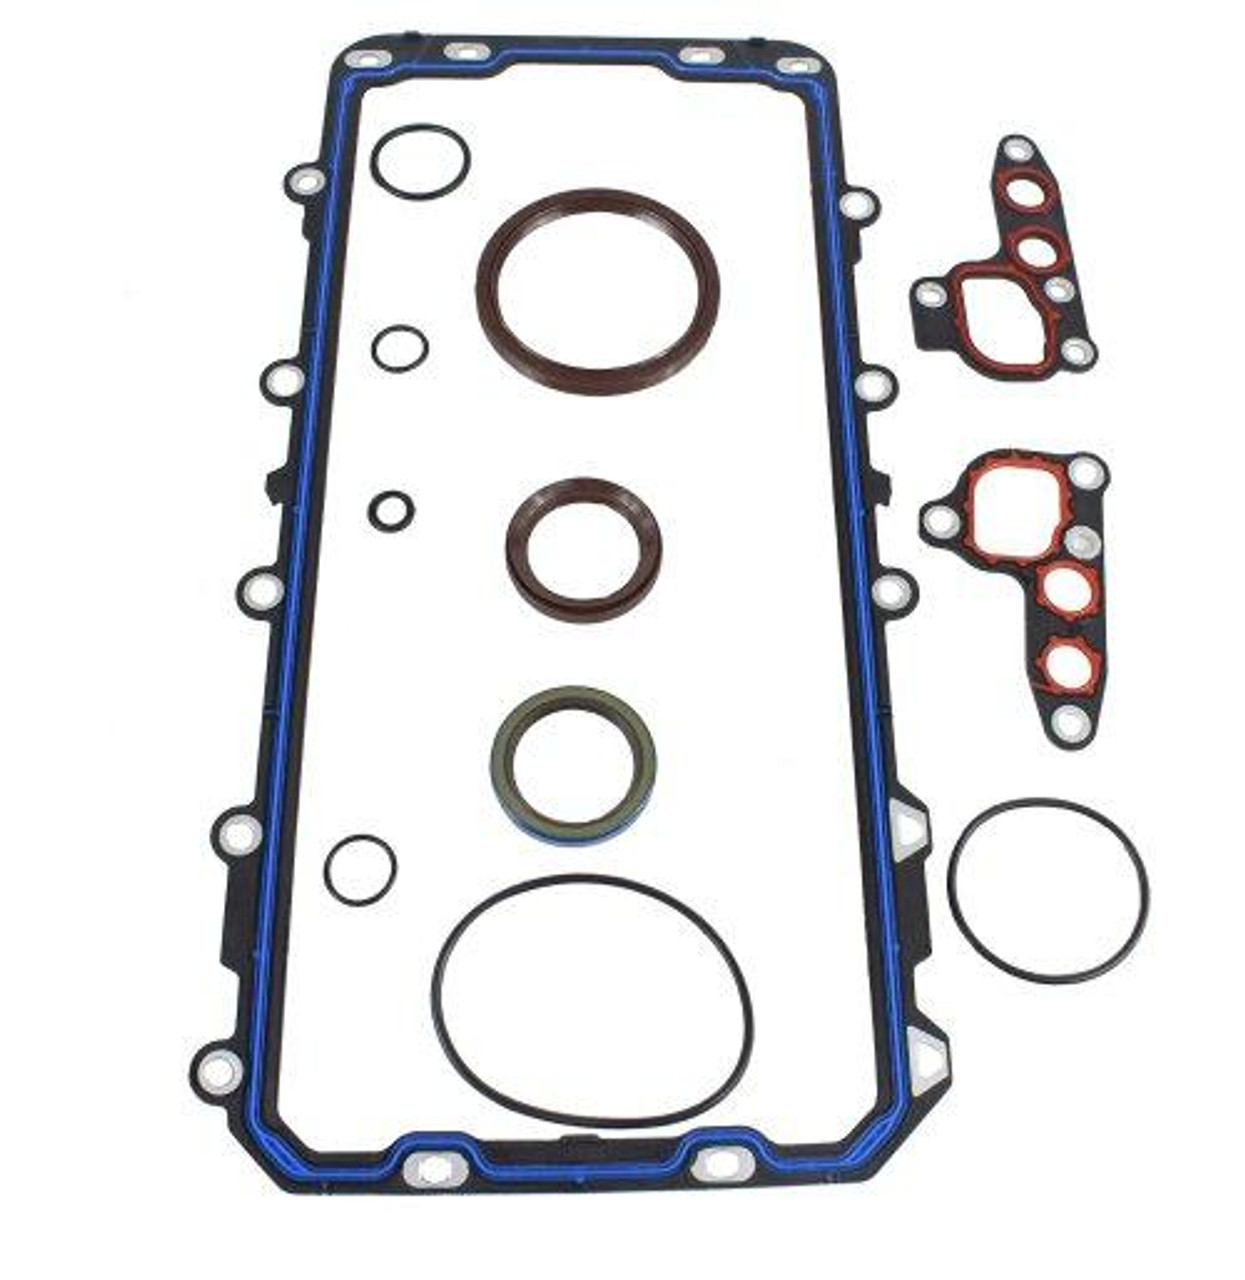 Lower Gasket Set - 2009 Ford Mustang 4.6L Engine Parts # LGS4150ZE265